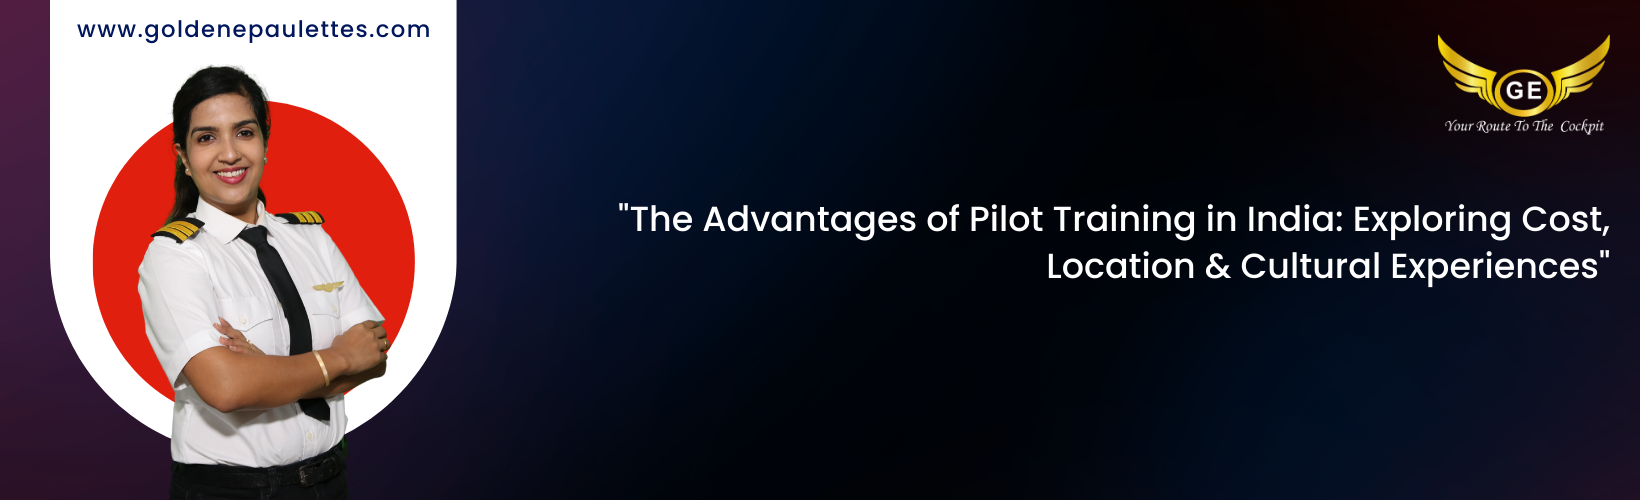 Choosing Between Online and In-Person Pilot Training